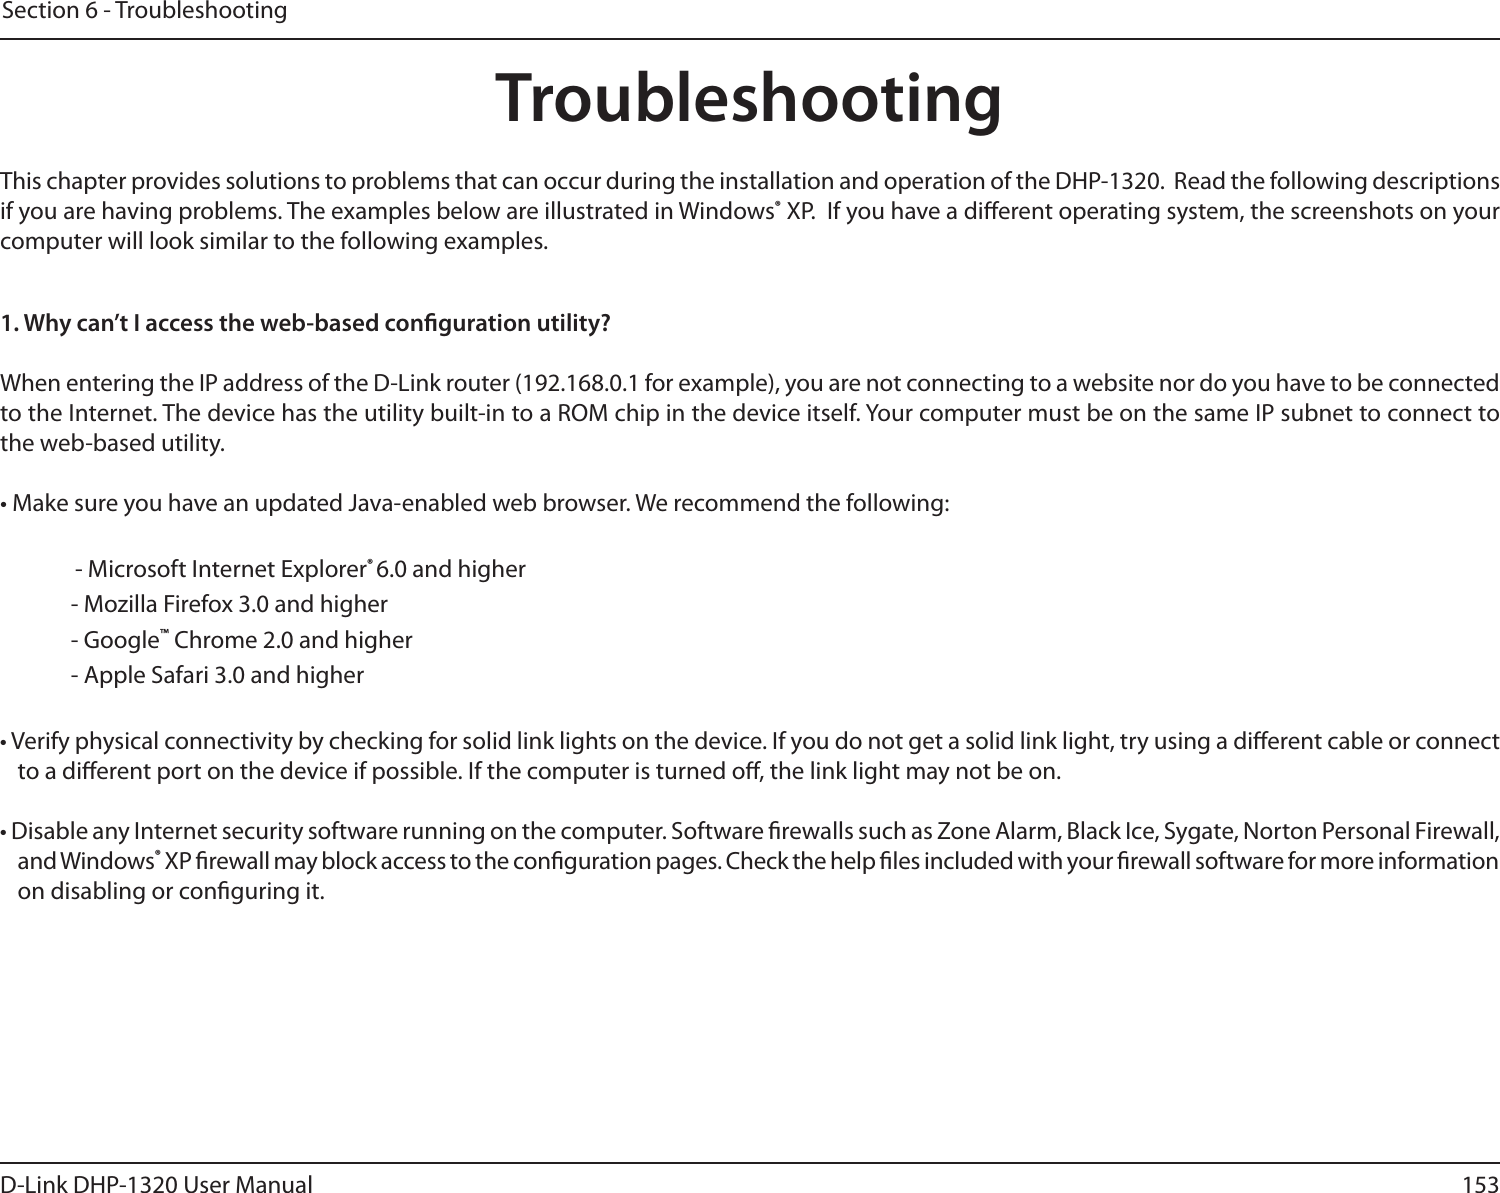 153D-Link DHP-1320 User ManualSection 6 - TroubleshootingTroubleshootingThis chapter provides solutions to problems that can occur during the installation and operation of the DHP-1320.  Read the following descriptions if you are having problems. The examples below are illustrated in Windows® XP.  If you have a dierent operating system, the screenshots on your computer will look similar to the following examples.1. Why can’t I access the web-based conguration utility?When entering the IP address of the D-Link router (192.168.0.1 for example), you are not connecting to a website nor do you have to be connected to the Internet. The device has the utility built-in to a ROM chip in the device itself. Your computer must be on the same IP subnet to connect to the web-based utility. • Make sure you have an updated Java-enabled web browser. We recommend the following:    - Microsoft Internet Explorer® 6.0 and higher- Mozilla Firefox 3.0 and higher- Google™ Chrome 2.0 and higher- Apple Safari 3.0 and higher• Verify physical connectivity by checking for solid link lights on the device. If you do not get a solid link light, try using a dierent cable or connect to a dierent port on the device if possible. If the computer is turned o, the link light may not be on.• Disable any Internet security software running on the computer. Software rewalls such as Zone Alarm, Black Ice, Sygate, Norton Personal Firewall, and Windows® XP rewall may block access to the conguration pages. Check the help les included with your rewall software for more information on disabling or conguring it.